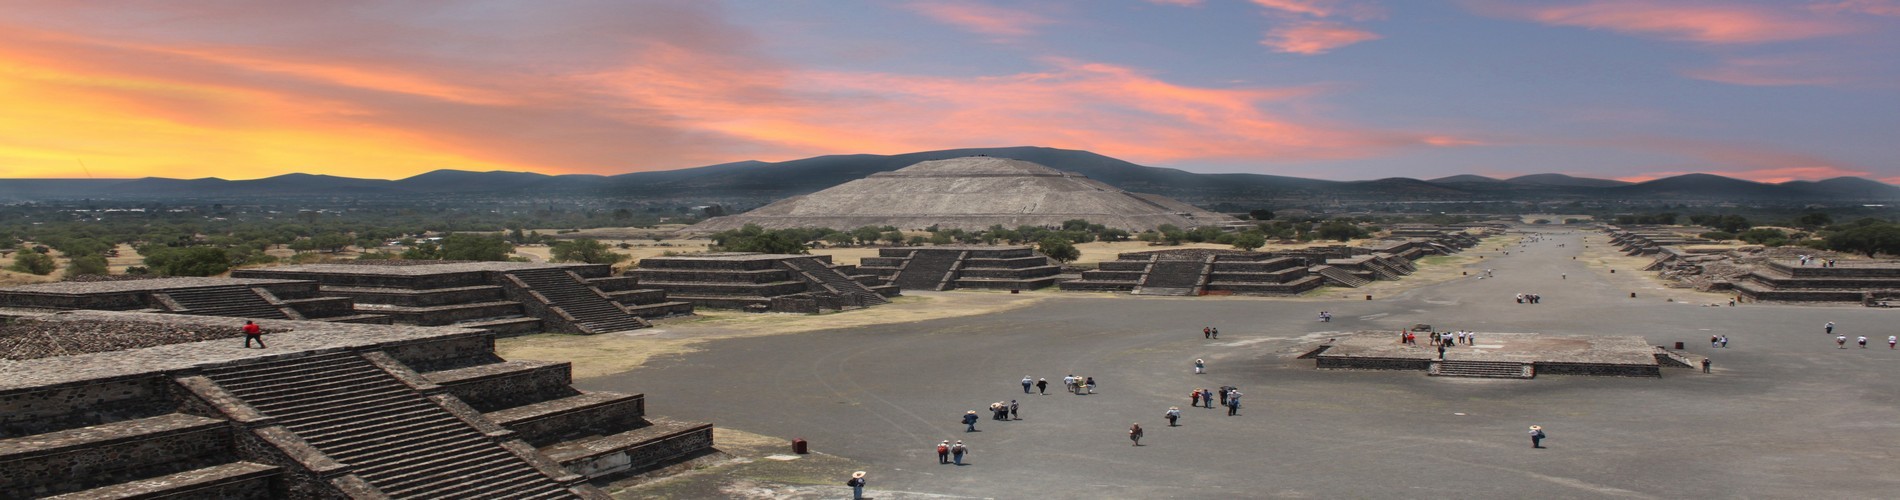 EXPLORING THE TOP 10 MUST-VISIT ATTRACTIONS IN MEXICO CITY - Va Expeditions